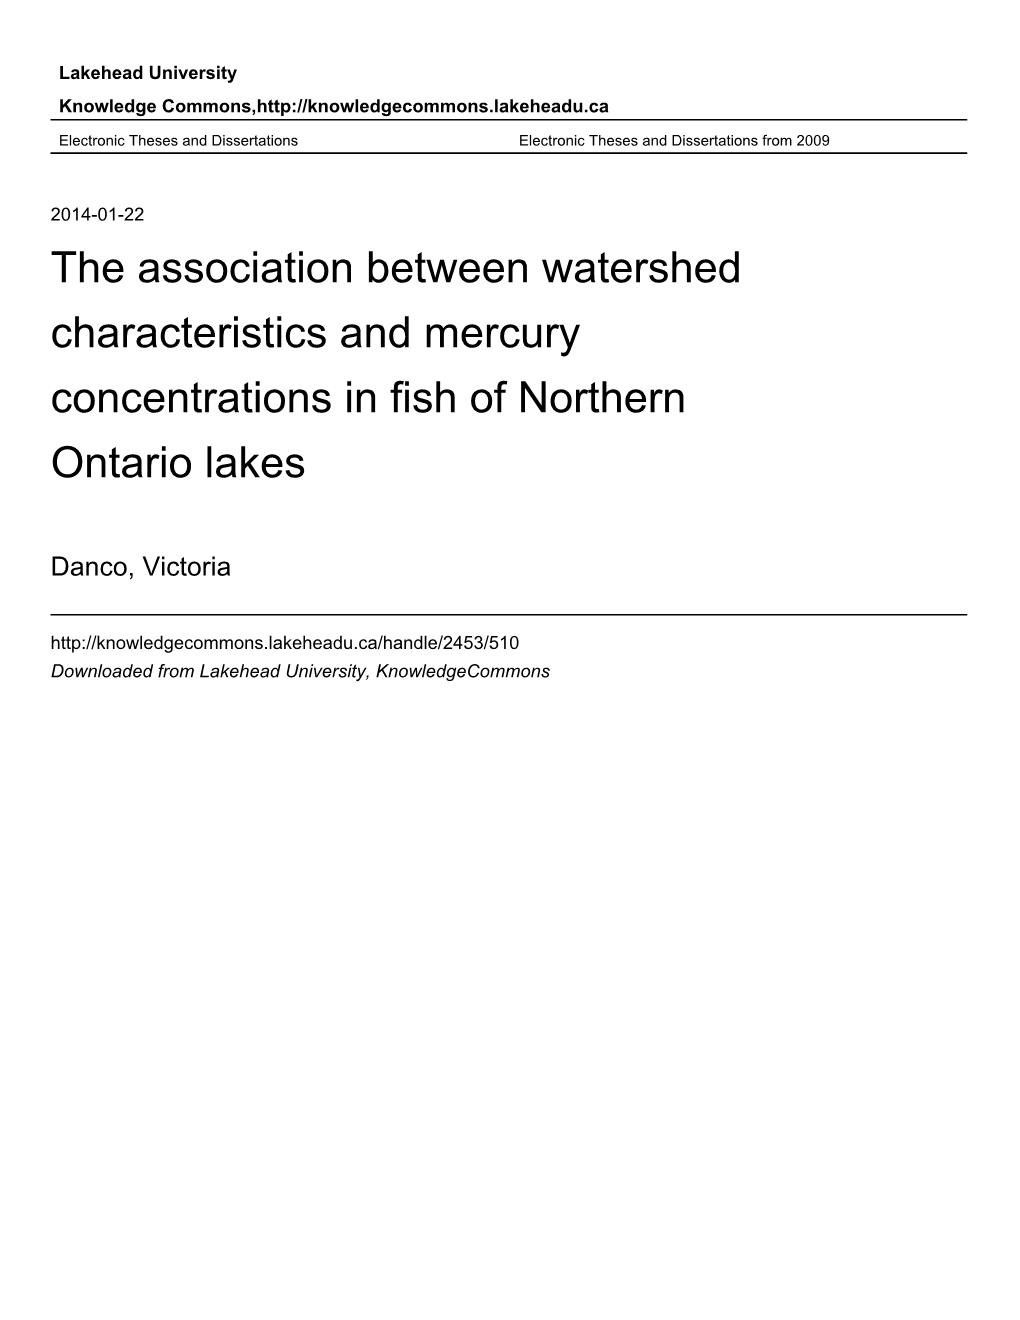 The Association Between Watershed Characteristics and Mercury Concentrations in Fish of Northern Ontario Lakes